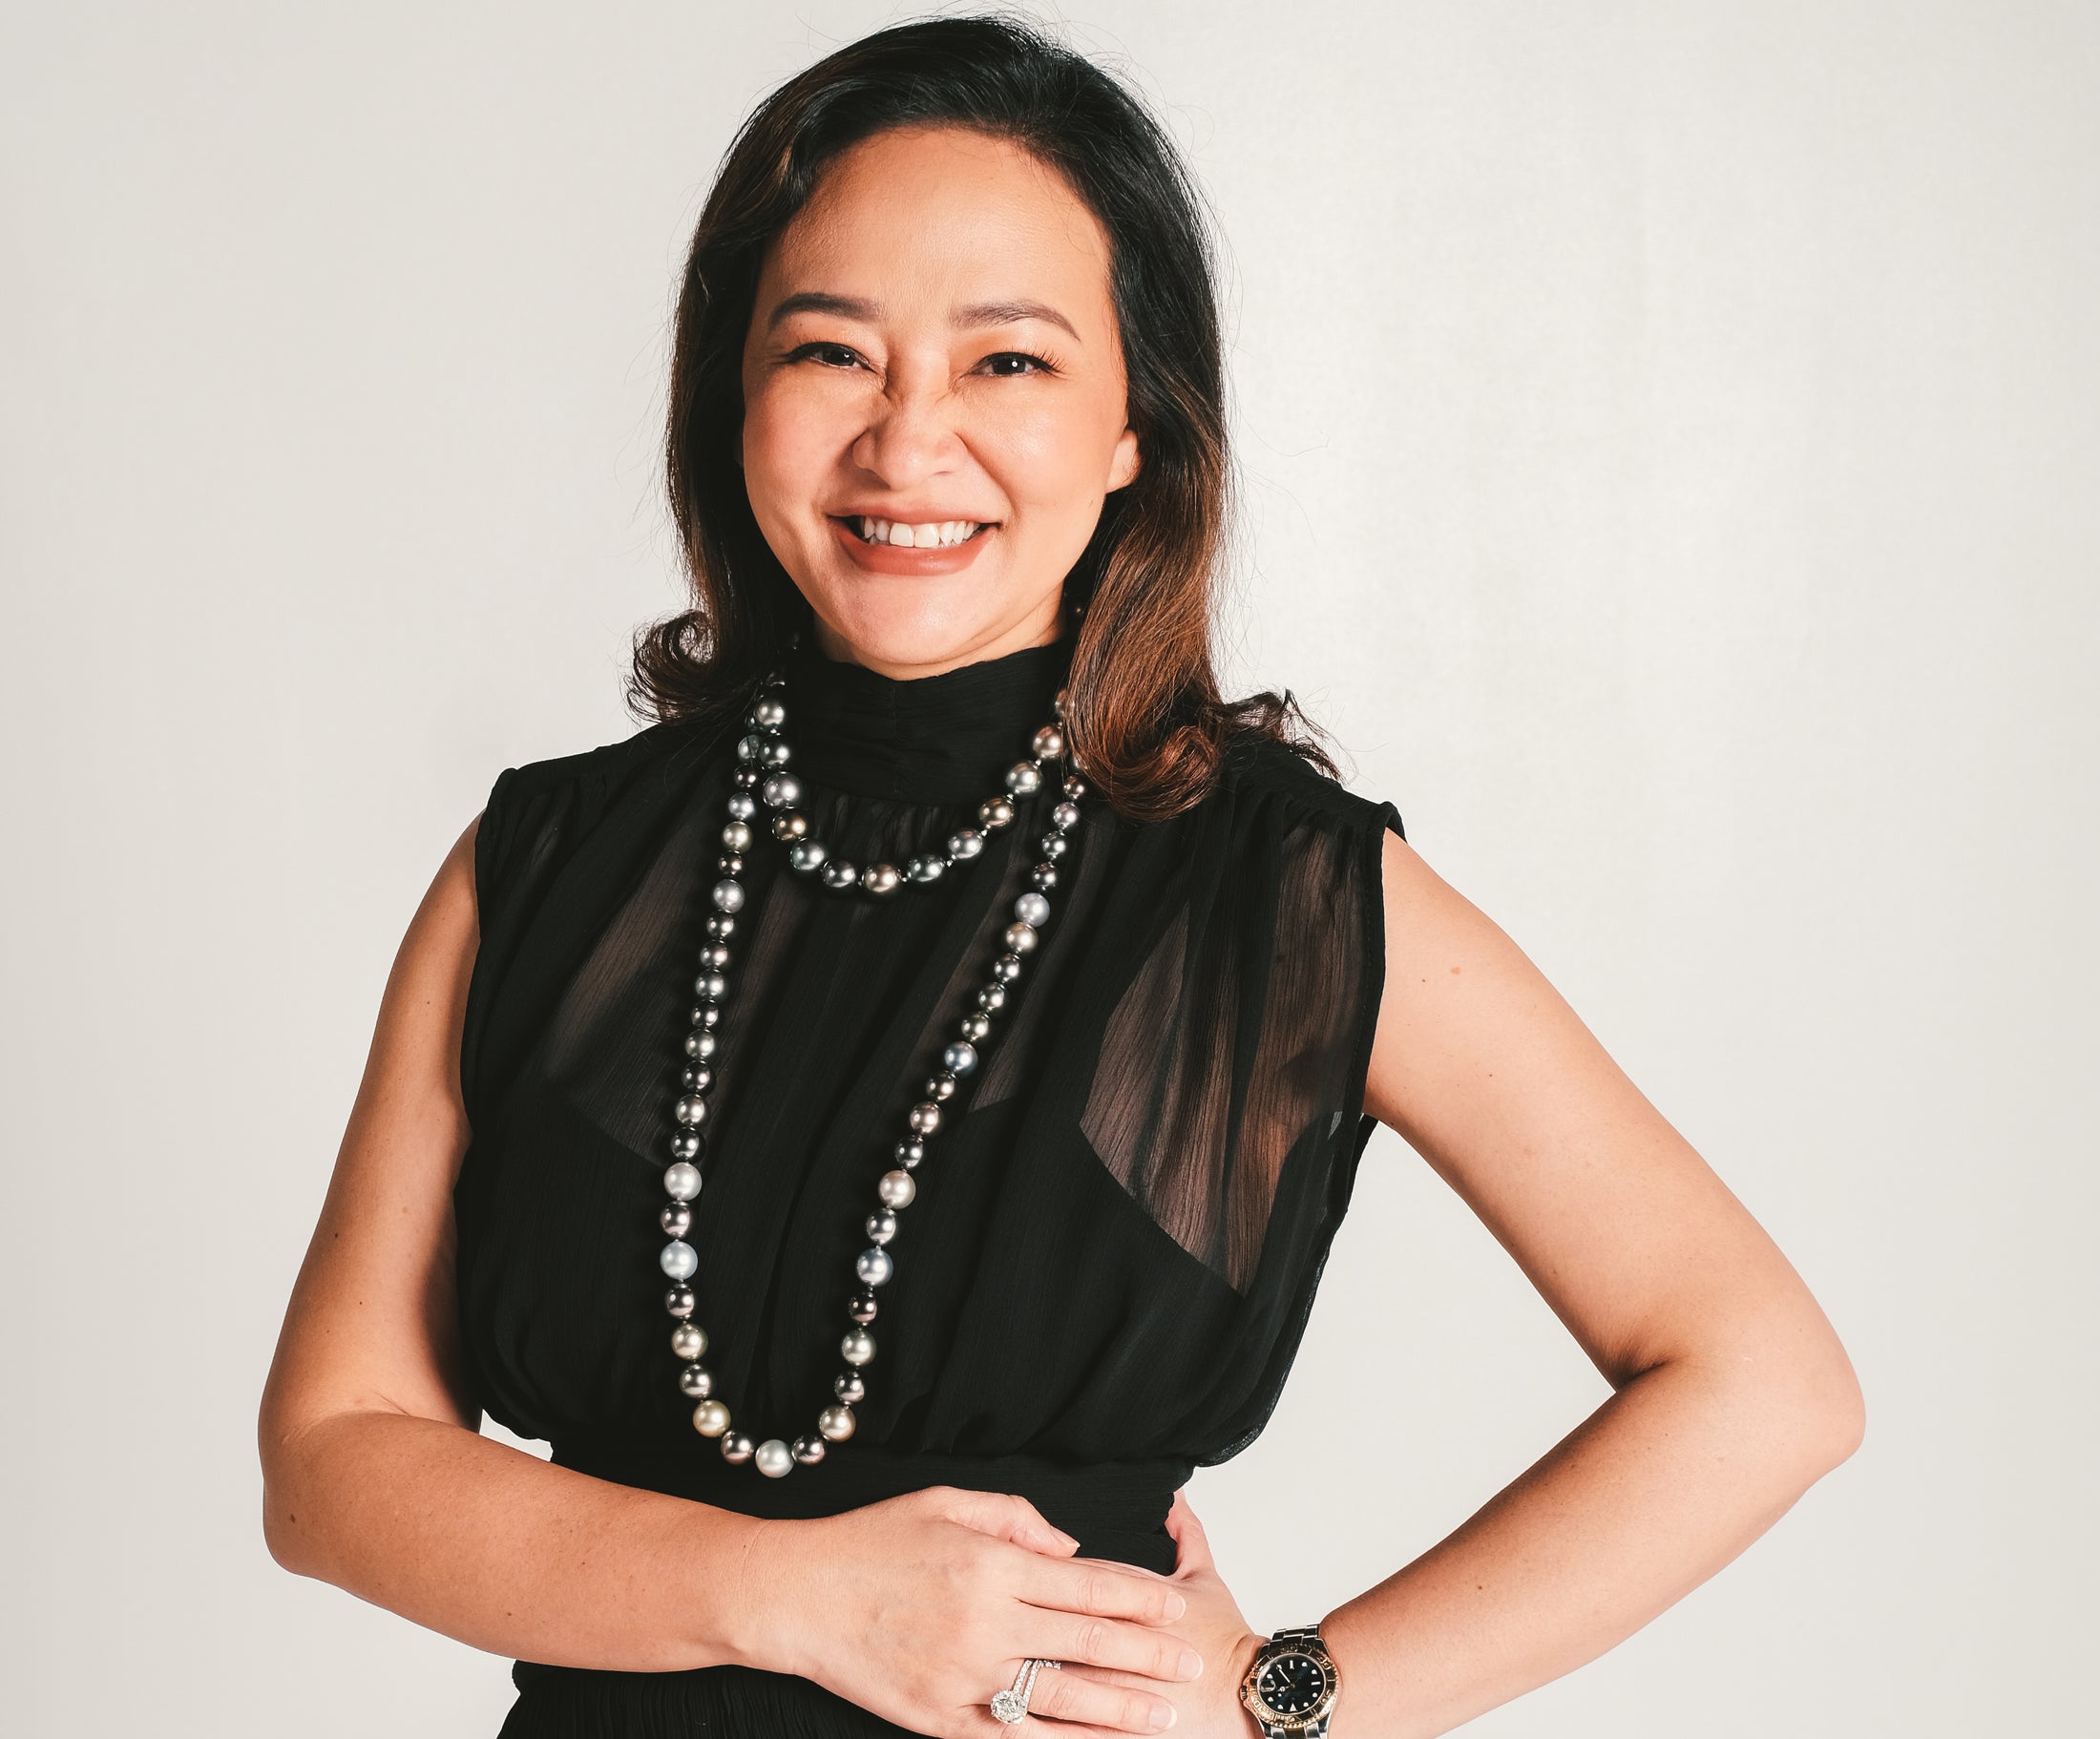 The Most Exceptional Pearl Expert: Introducing the Queen of Pearls